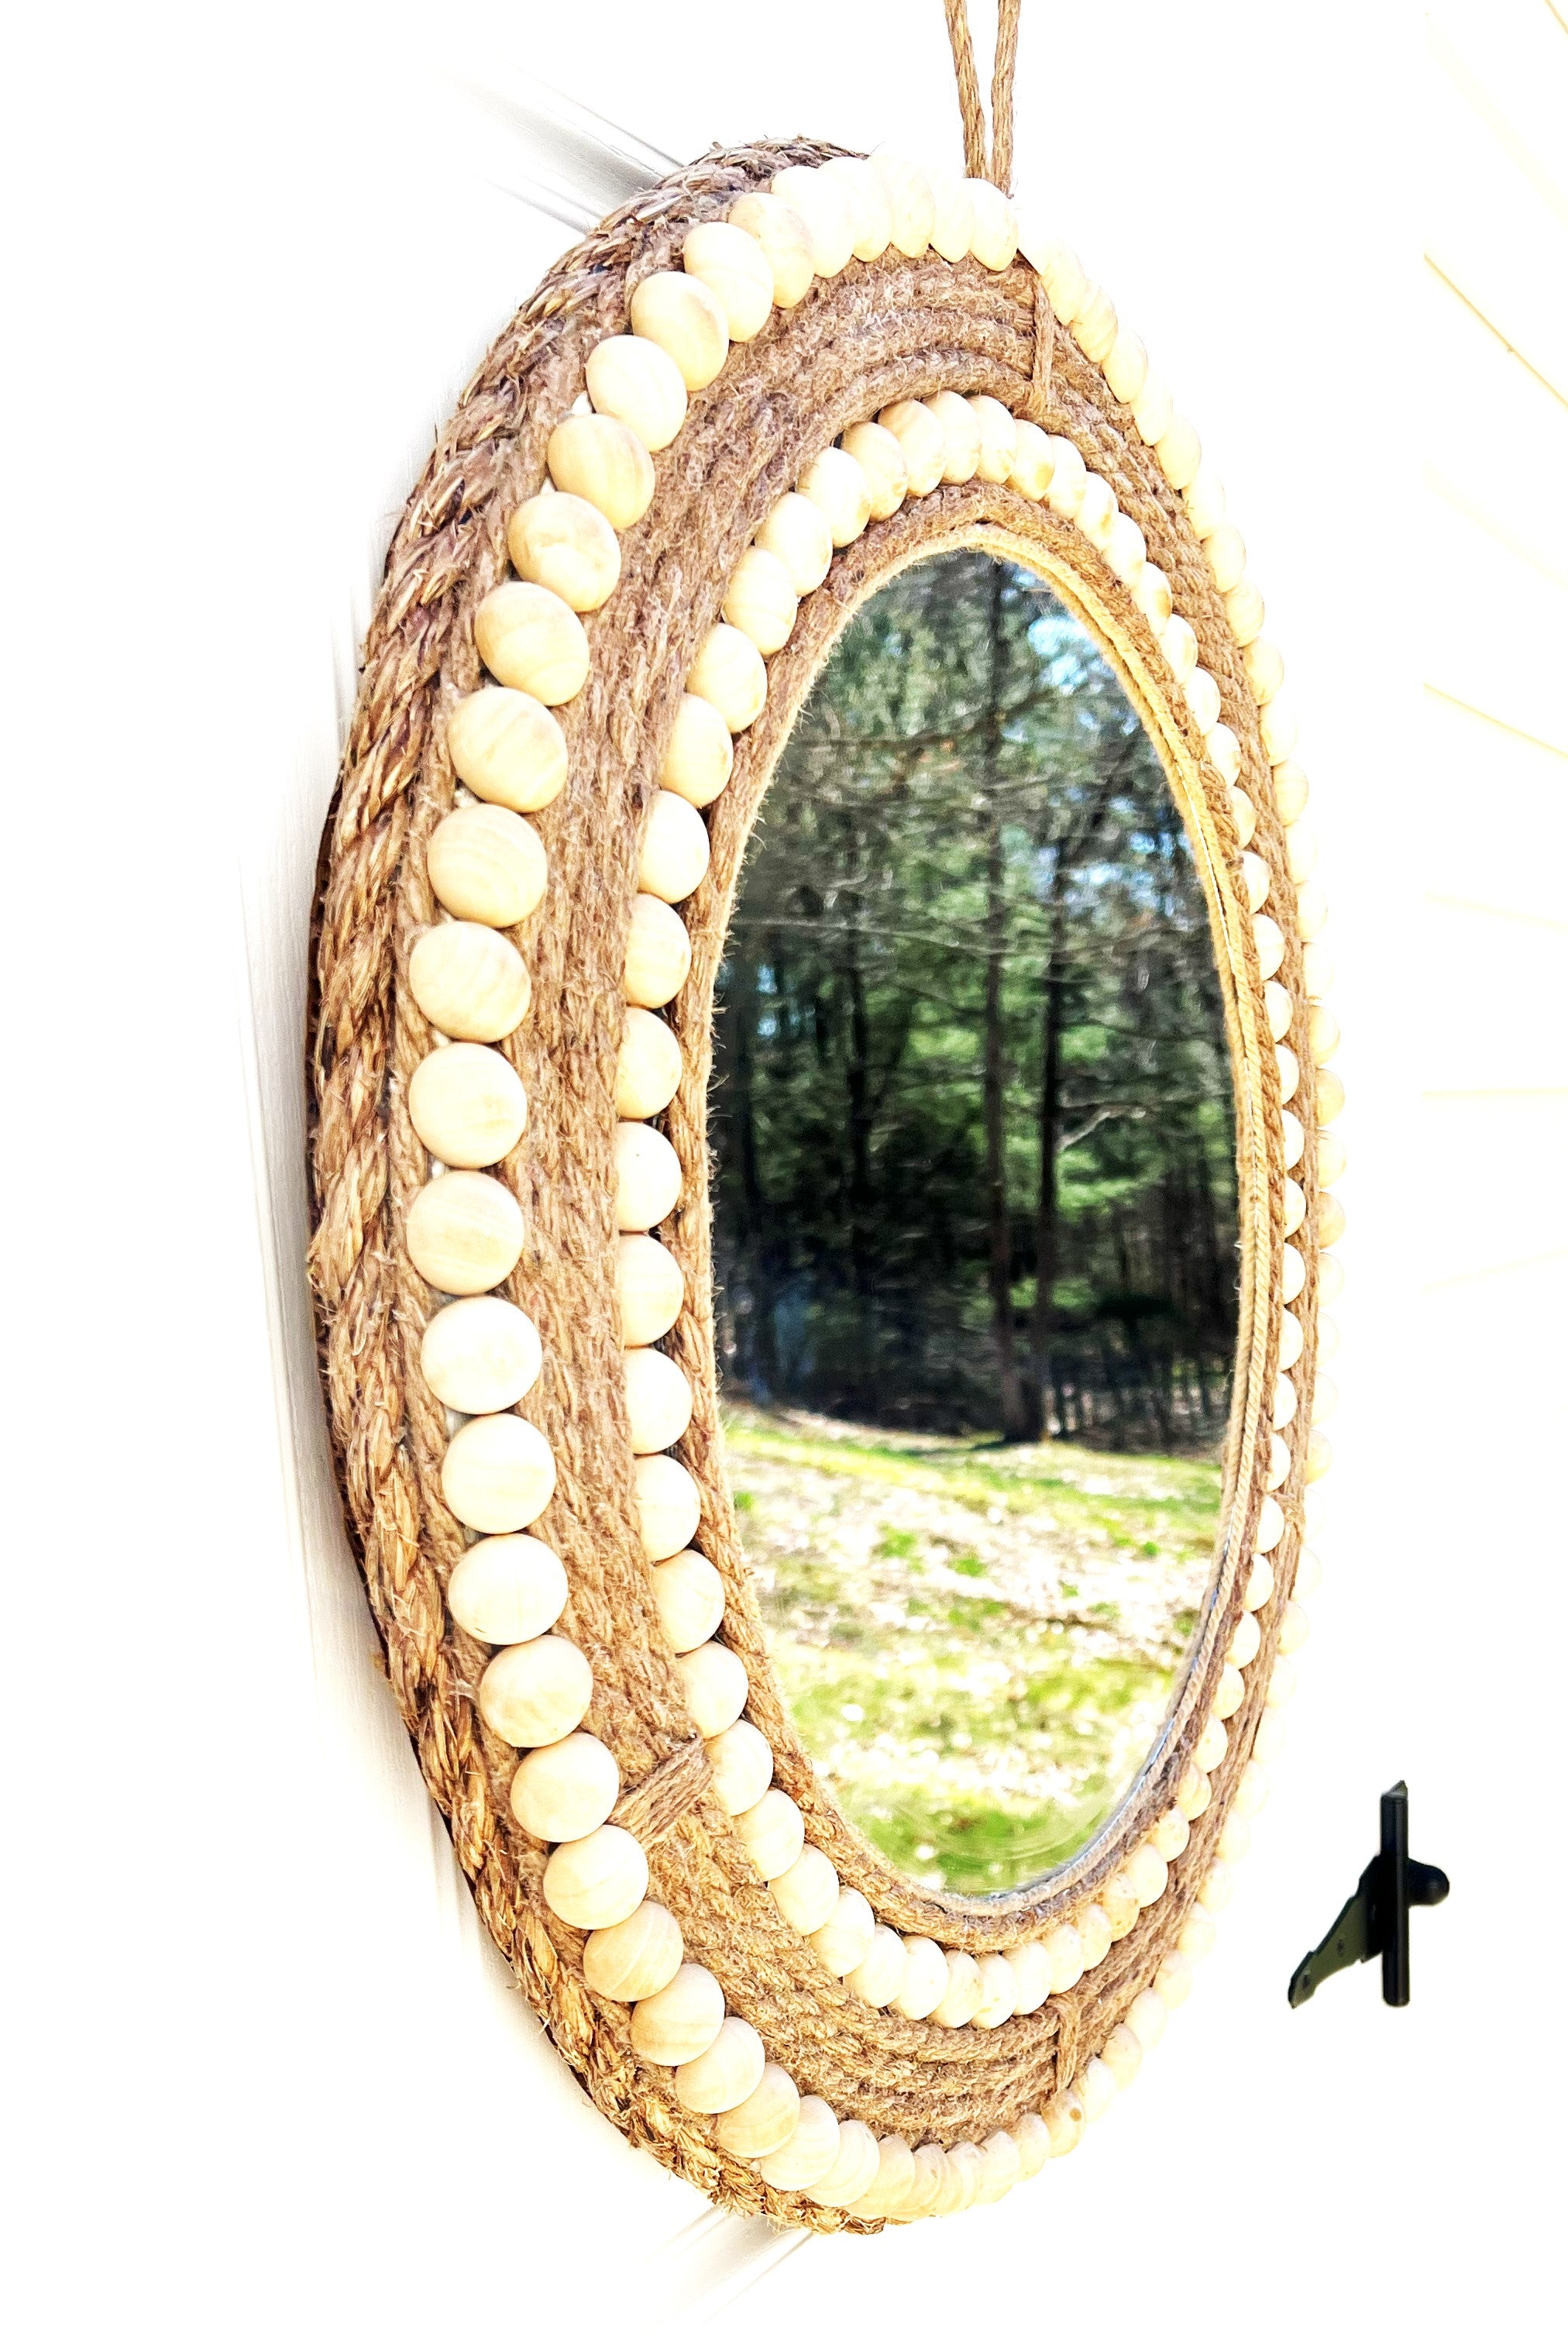 Rustic Mirror-24" Round With 16 Inch Mirror Reflection